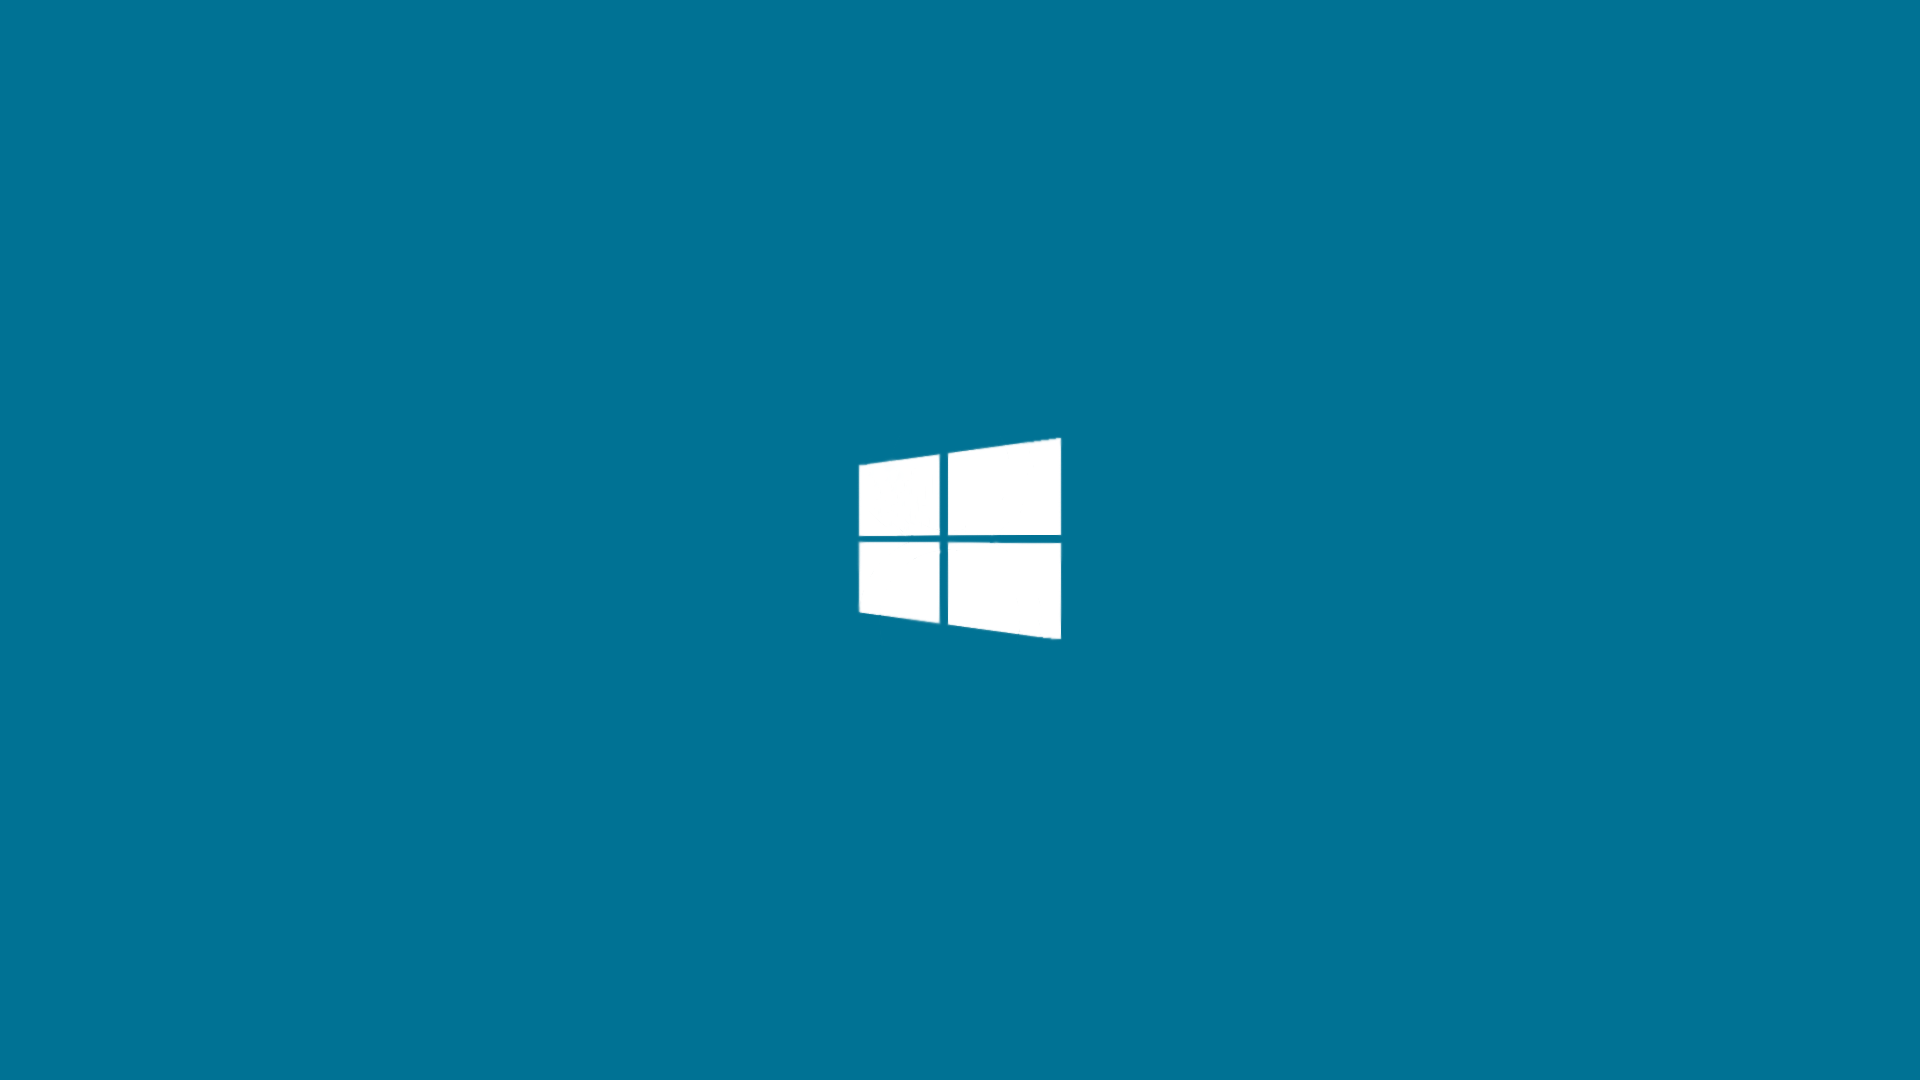 View topic   Windows 8 Photoshop Wallpapers Updated   BetaArchive